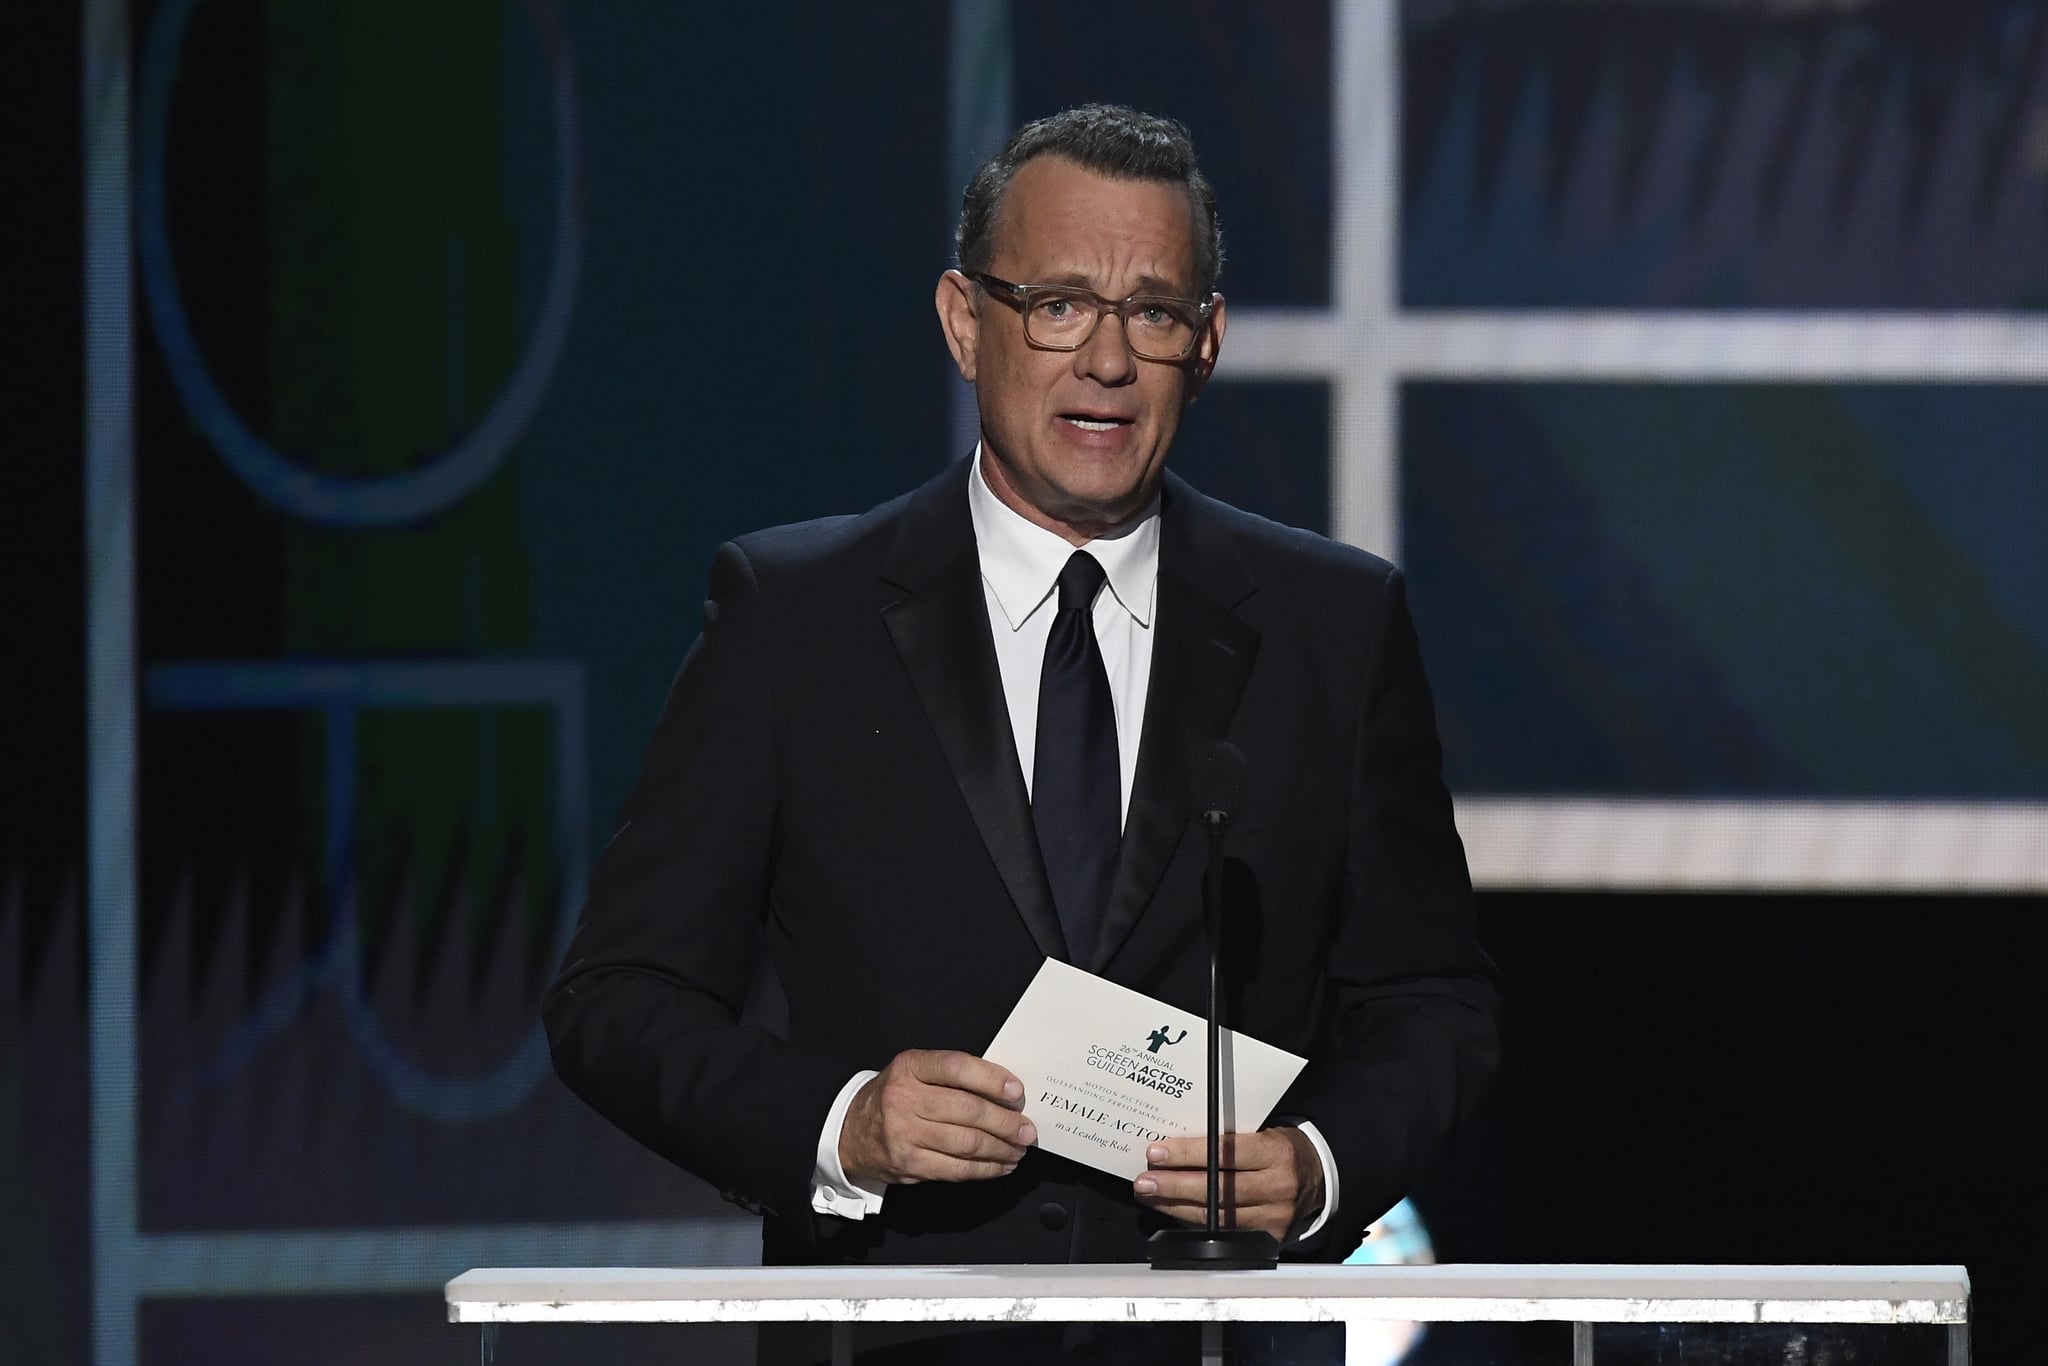 LOS ANGELES, CALIFORNIA - JANUARY 19: Tom Hanks speaks onstage during the 26th Annual Screen Actors Guild Awards at The Shrine Auditorium on January 19, 2020 in Los Angeles, California. 721359 (Photo by Kevork Djansezian/Getty Images for Turner)